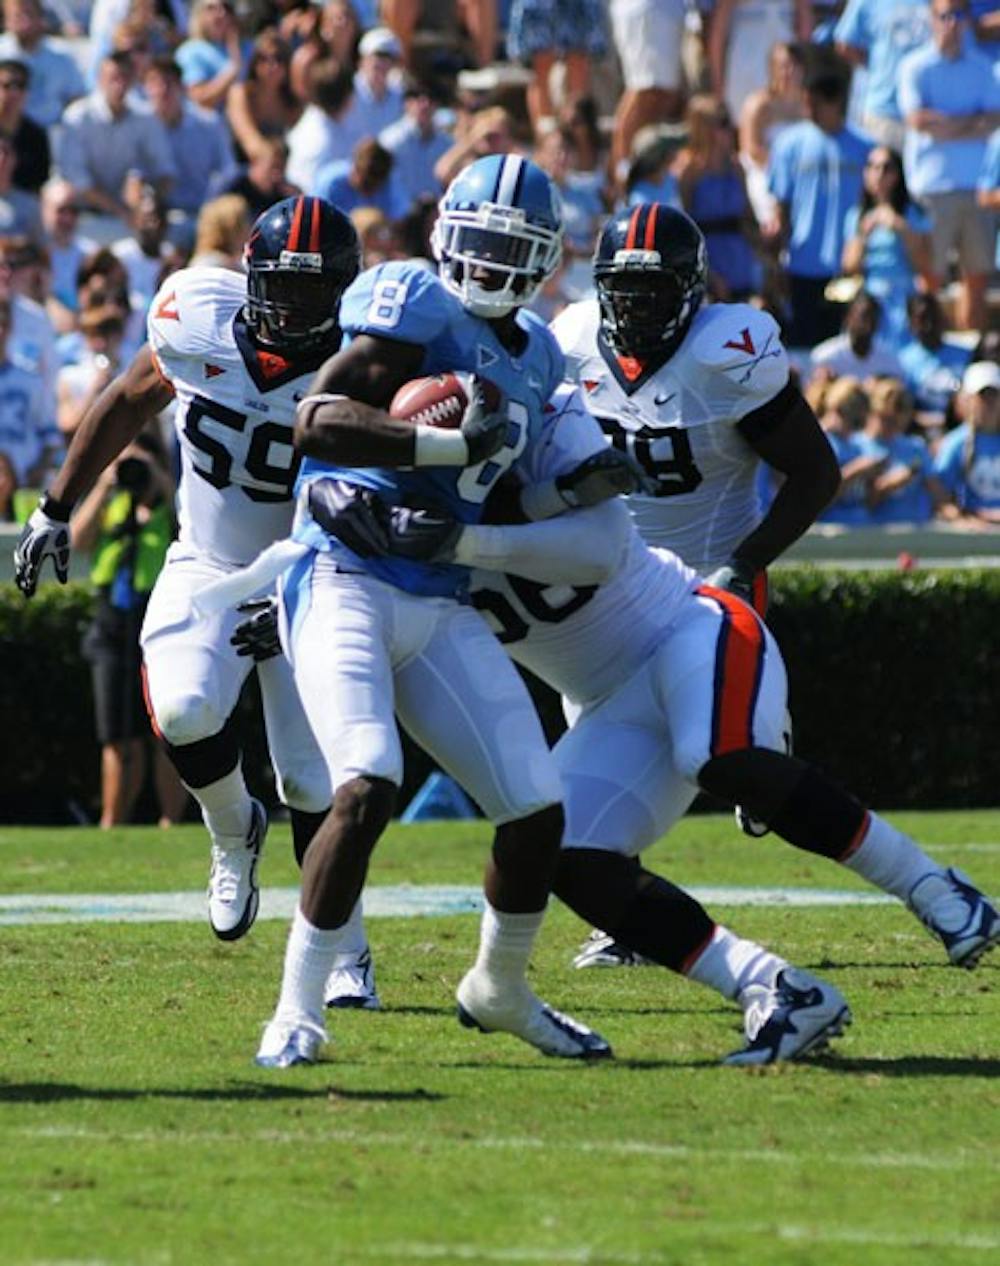 Greg Little leads North Carolina with 25 receptions, but the Tar Heels are still lacking in offense. DTH File/Andrew Dye